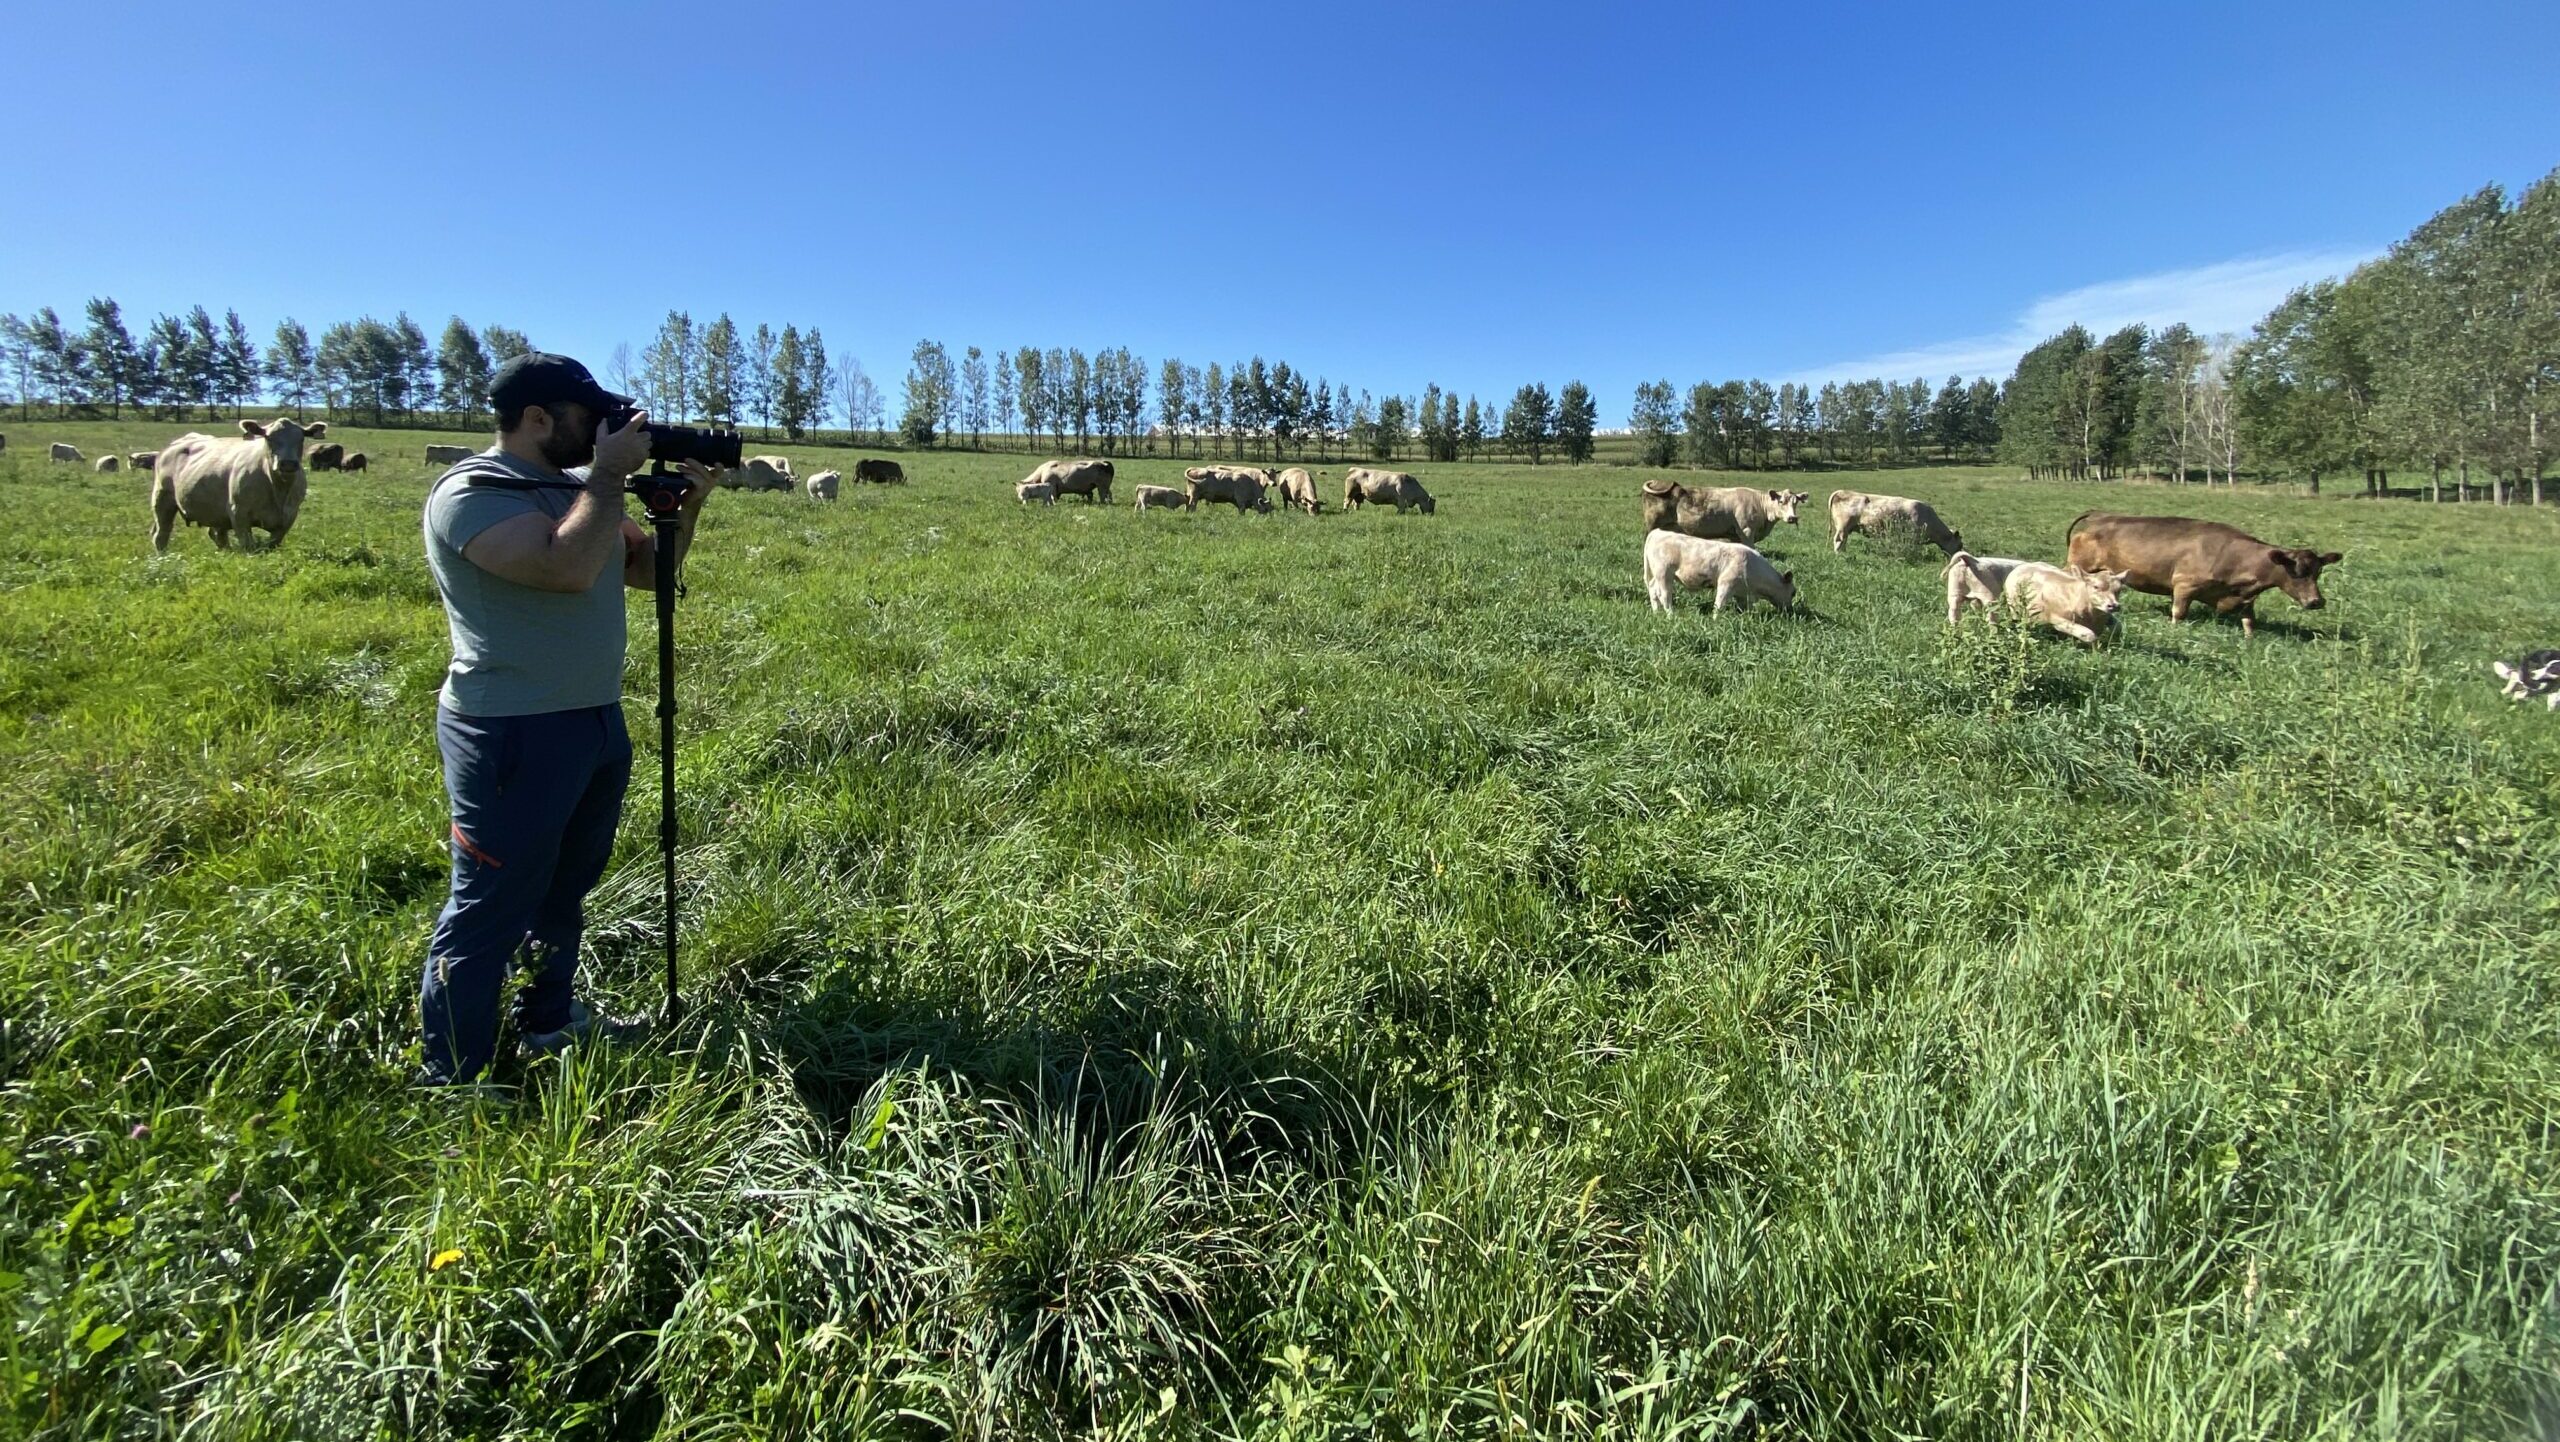 A person with a camera films cows as they graze on a pasture on a sunny day.